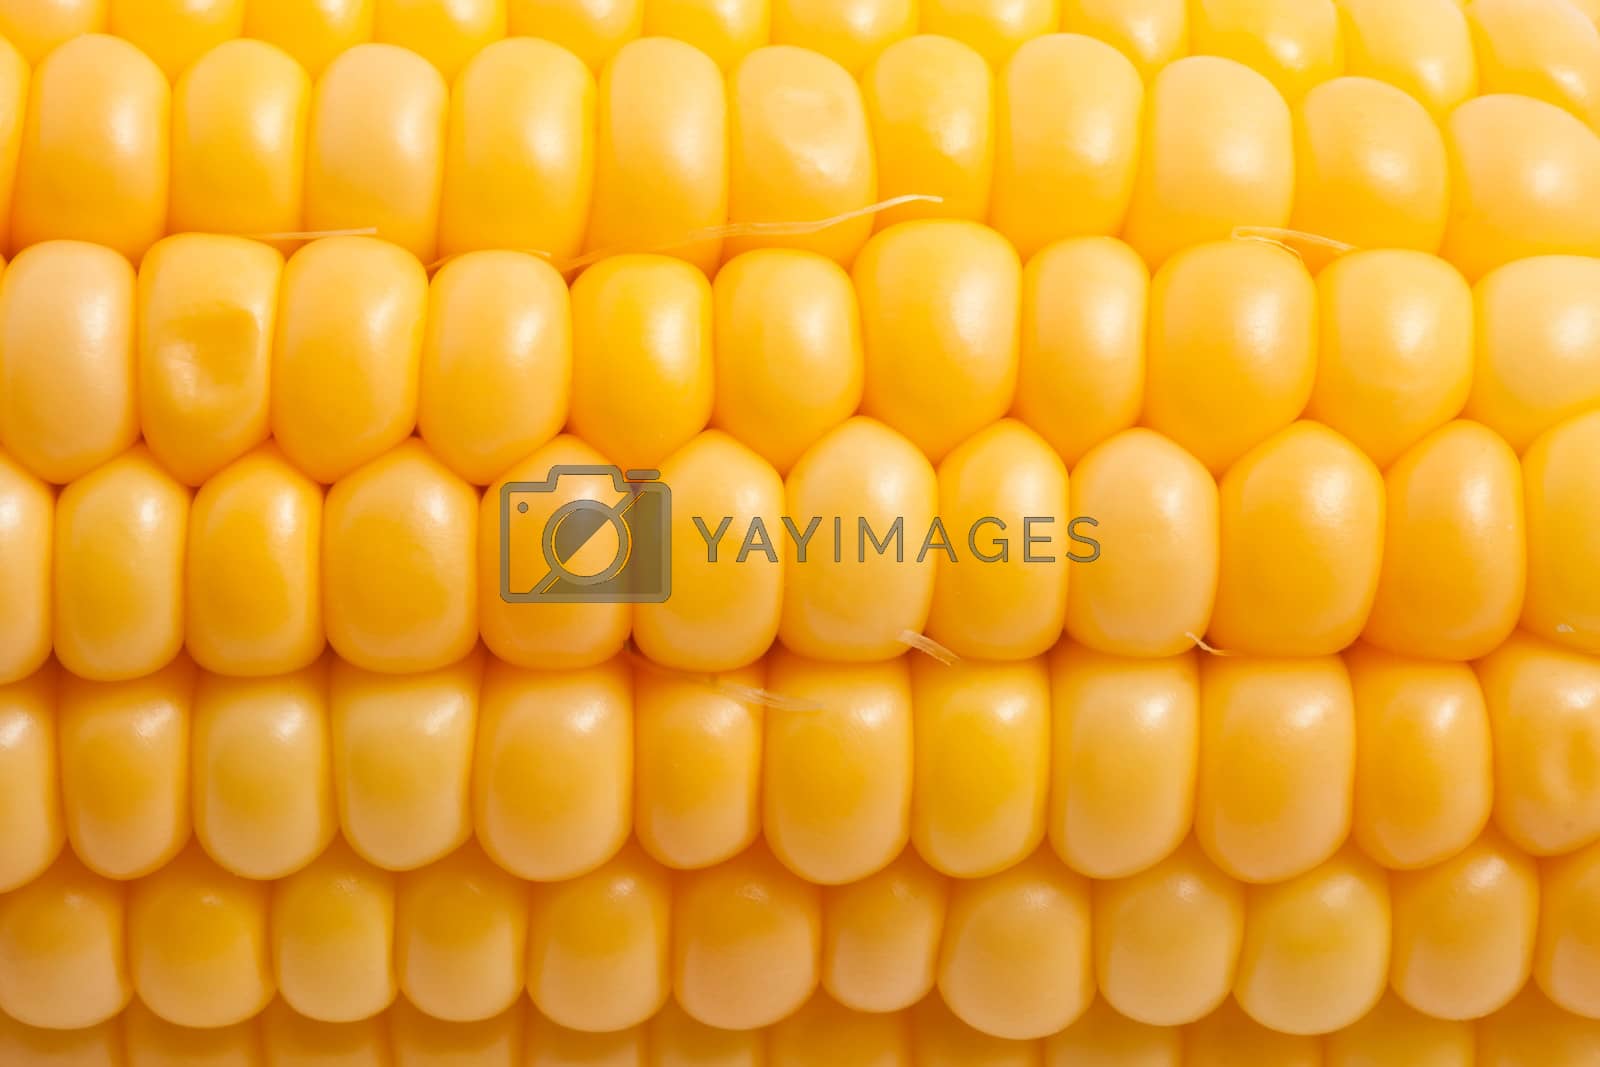 Royalty free image of Corn by sailorr